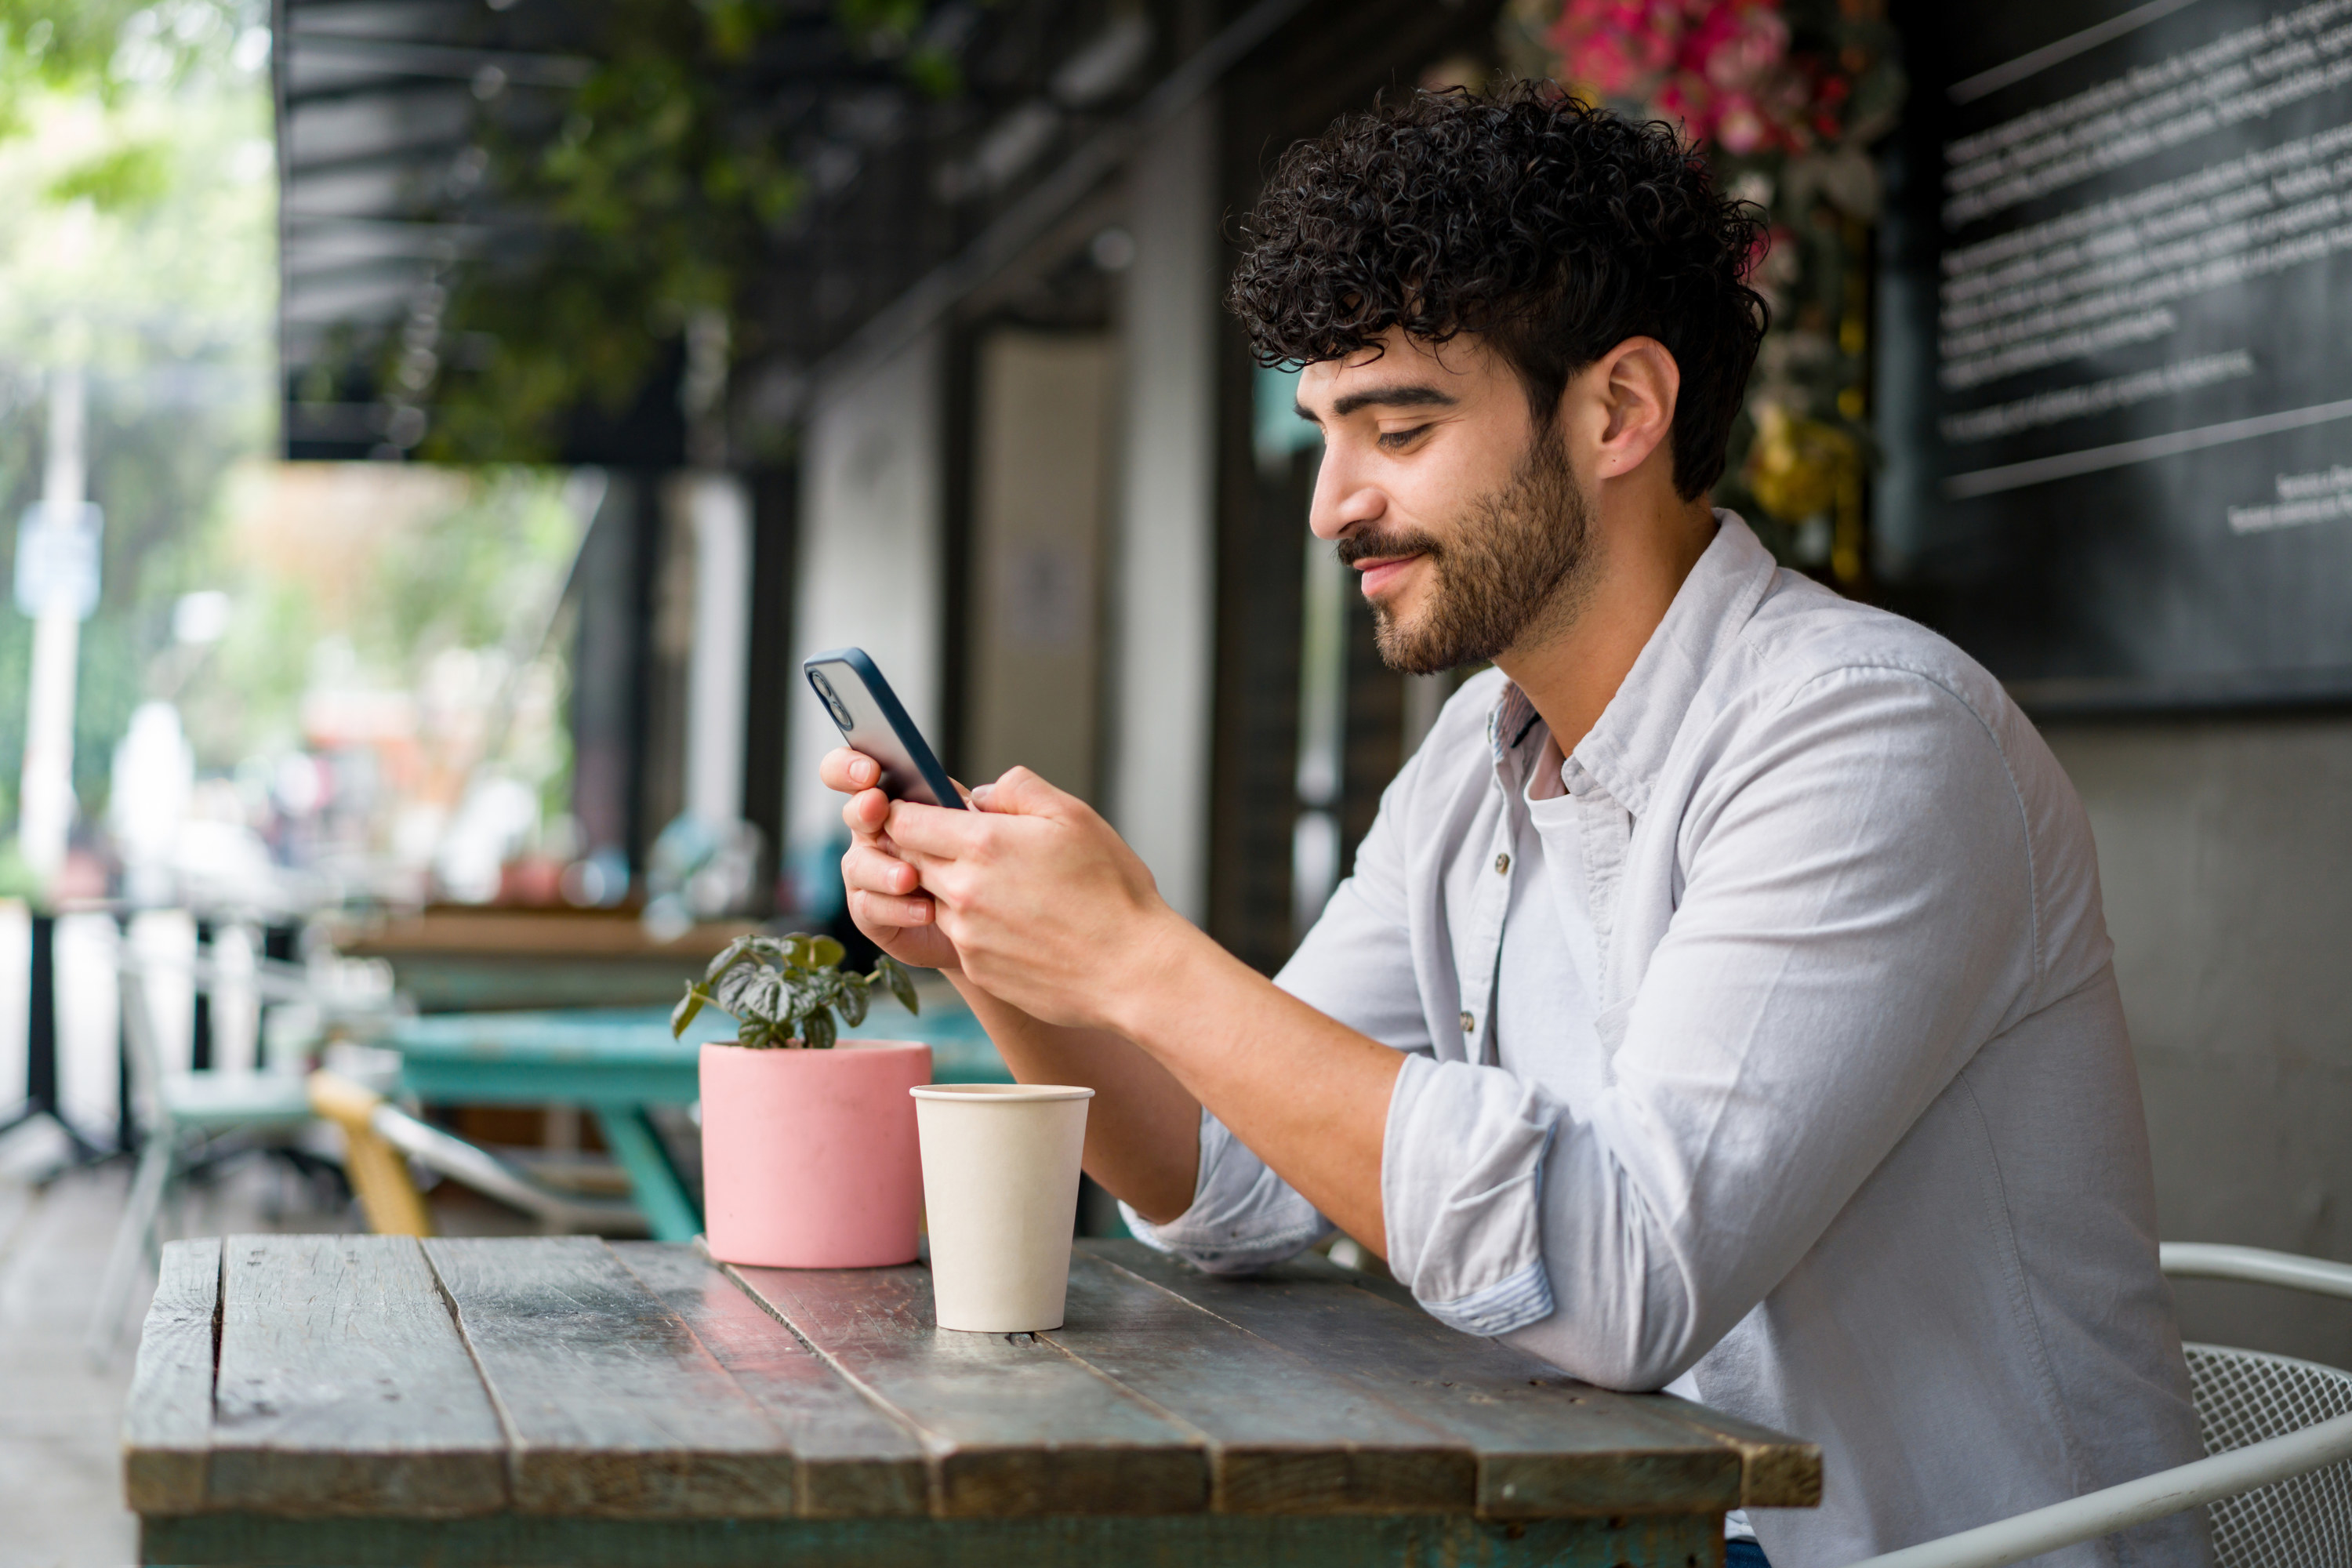 A person using an app at a restaurant outdoors